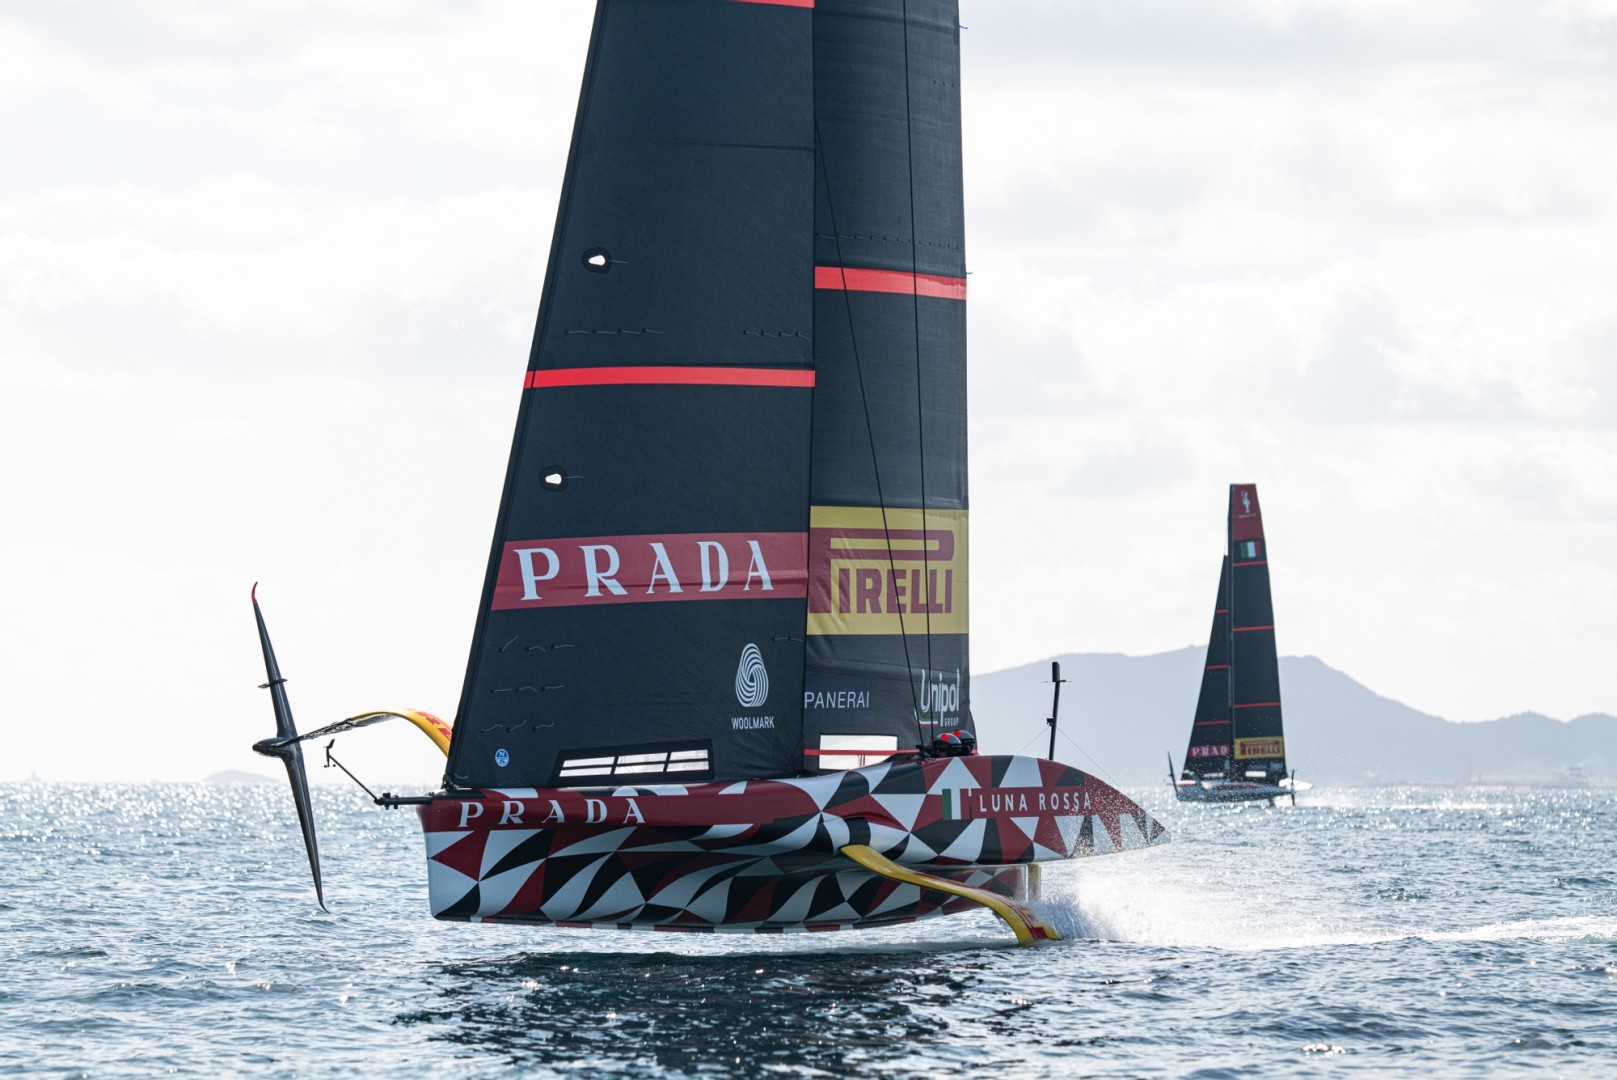 America's Cup: signing off on the Luna Rossa LEQ12